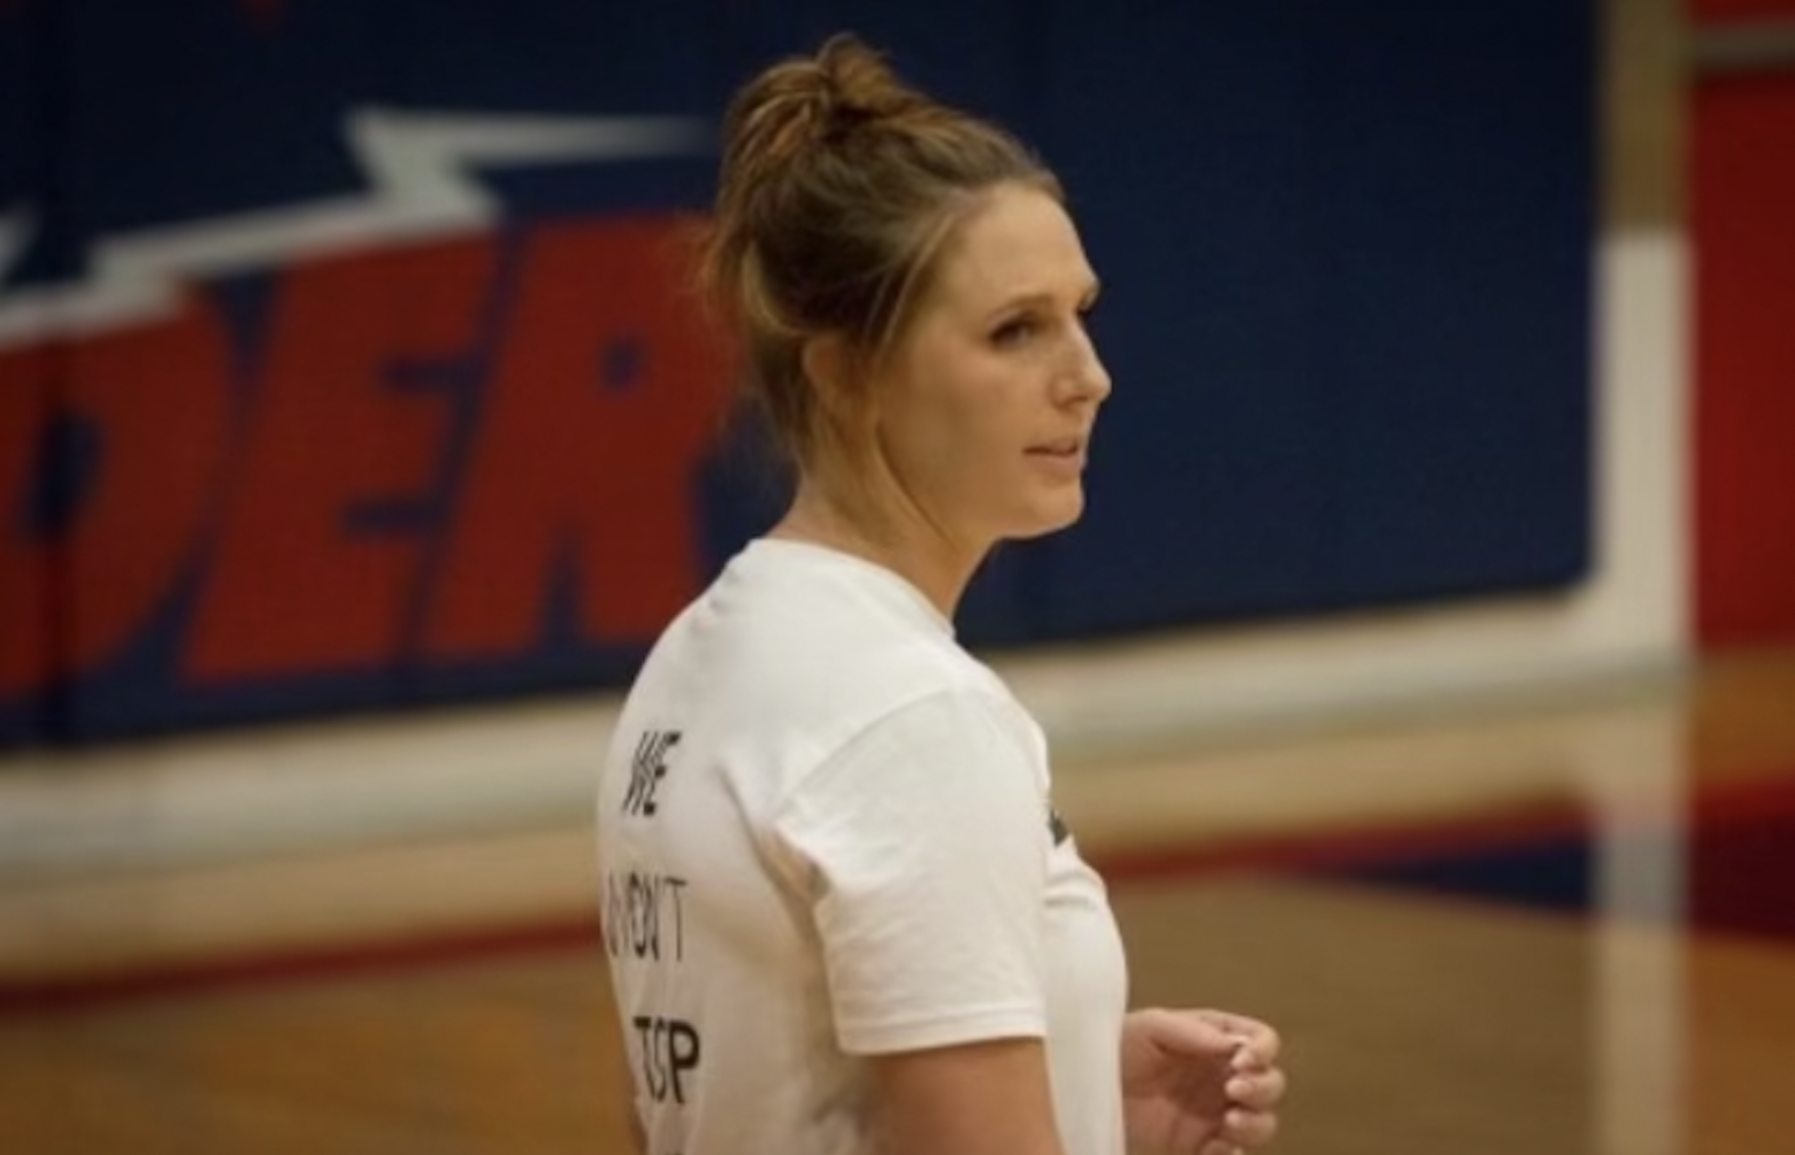 Kelsey Rhoades Larsen Resigns as Highland High School Volleyball Coach After Six Seasons Due to Family Matter